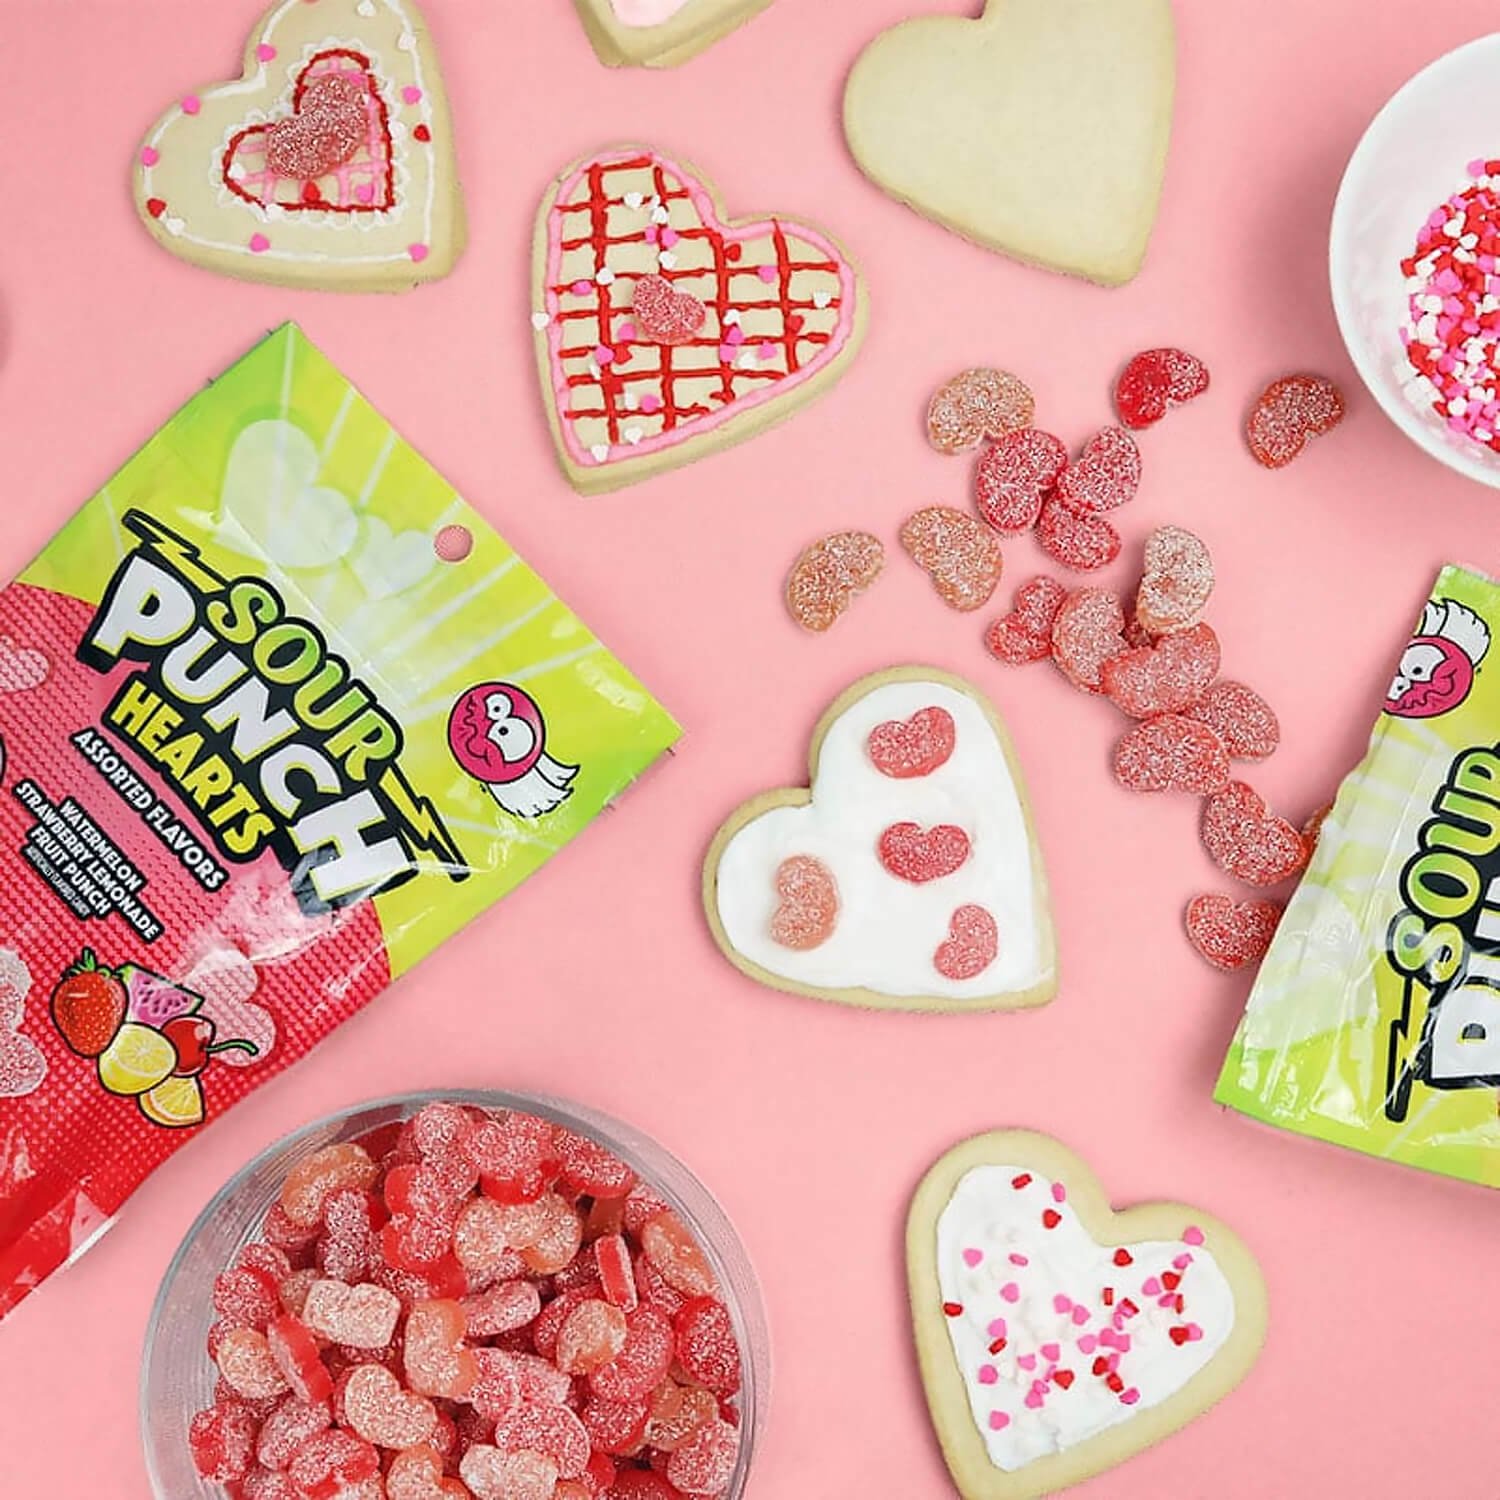 SOUR PUNCH Valentine's Day Candy Hearts with decorated cookies